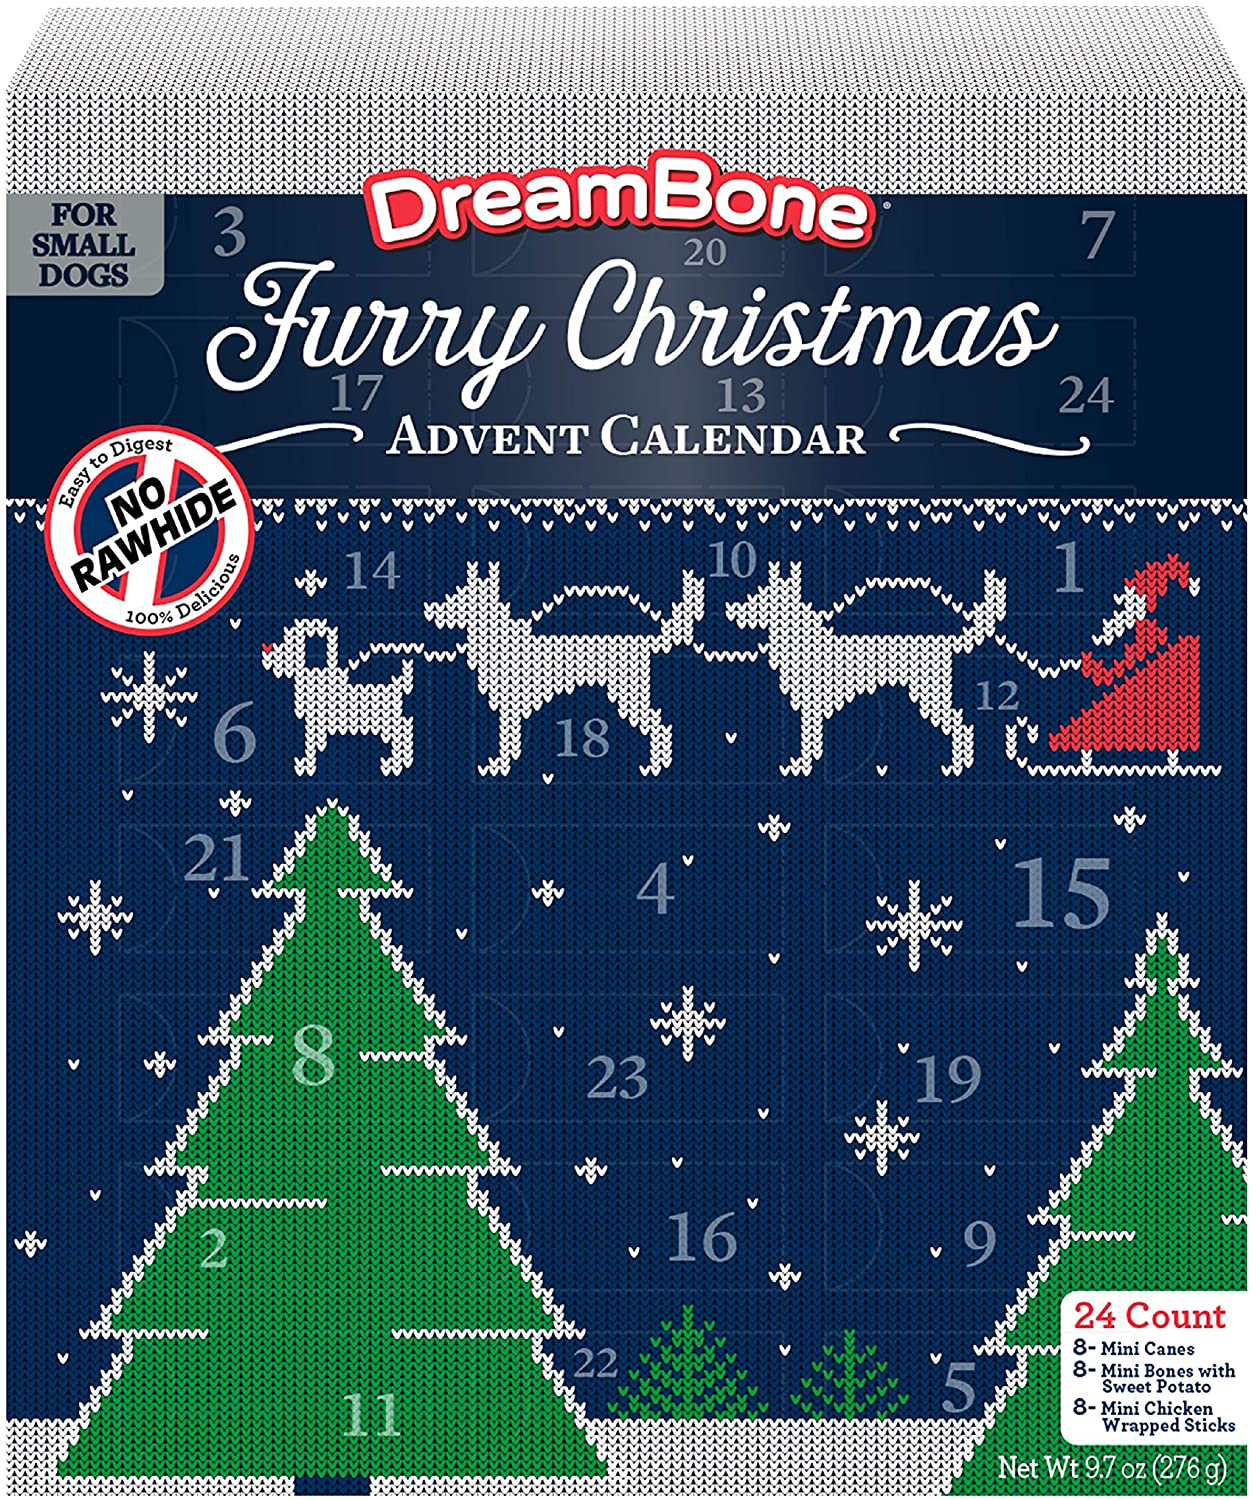 Dreambone Holiday Rawhide-Free Collection, Treat Your Dog to a Chew Made with Real Meat and Vegetables Animals & Pet Supplies > Pet Supplies > Dog Supplies > Dog Treats DreamBone Variety 24 Count (Pack of 1) 